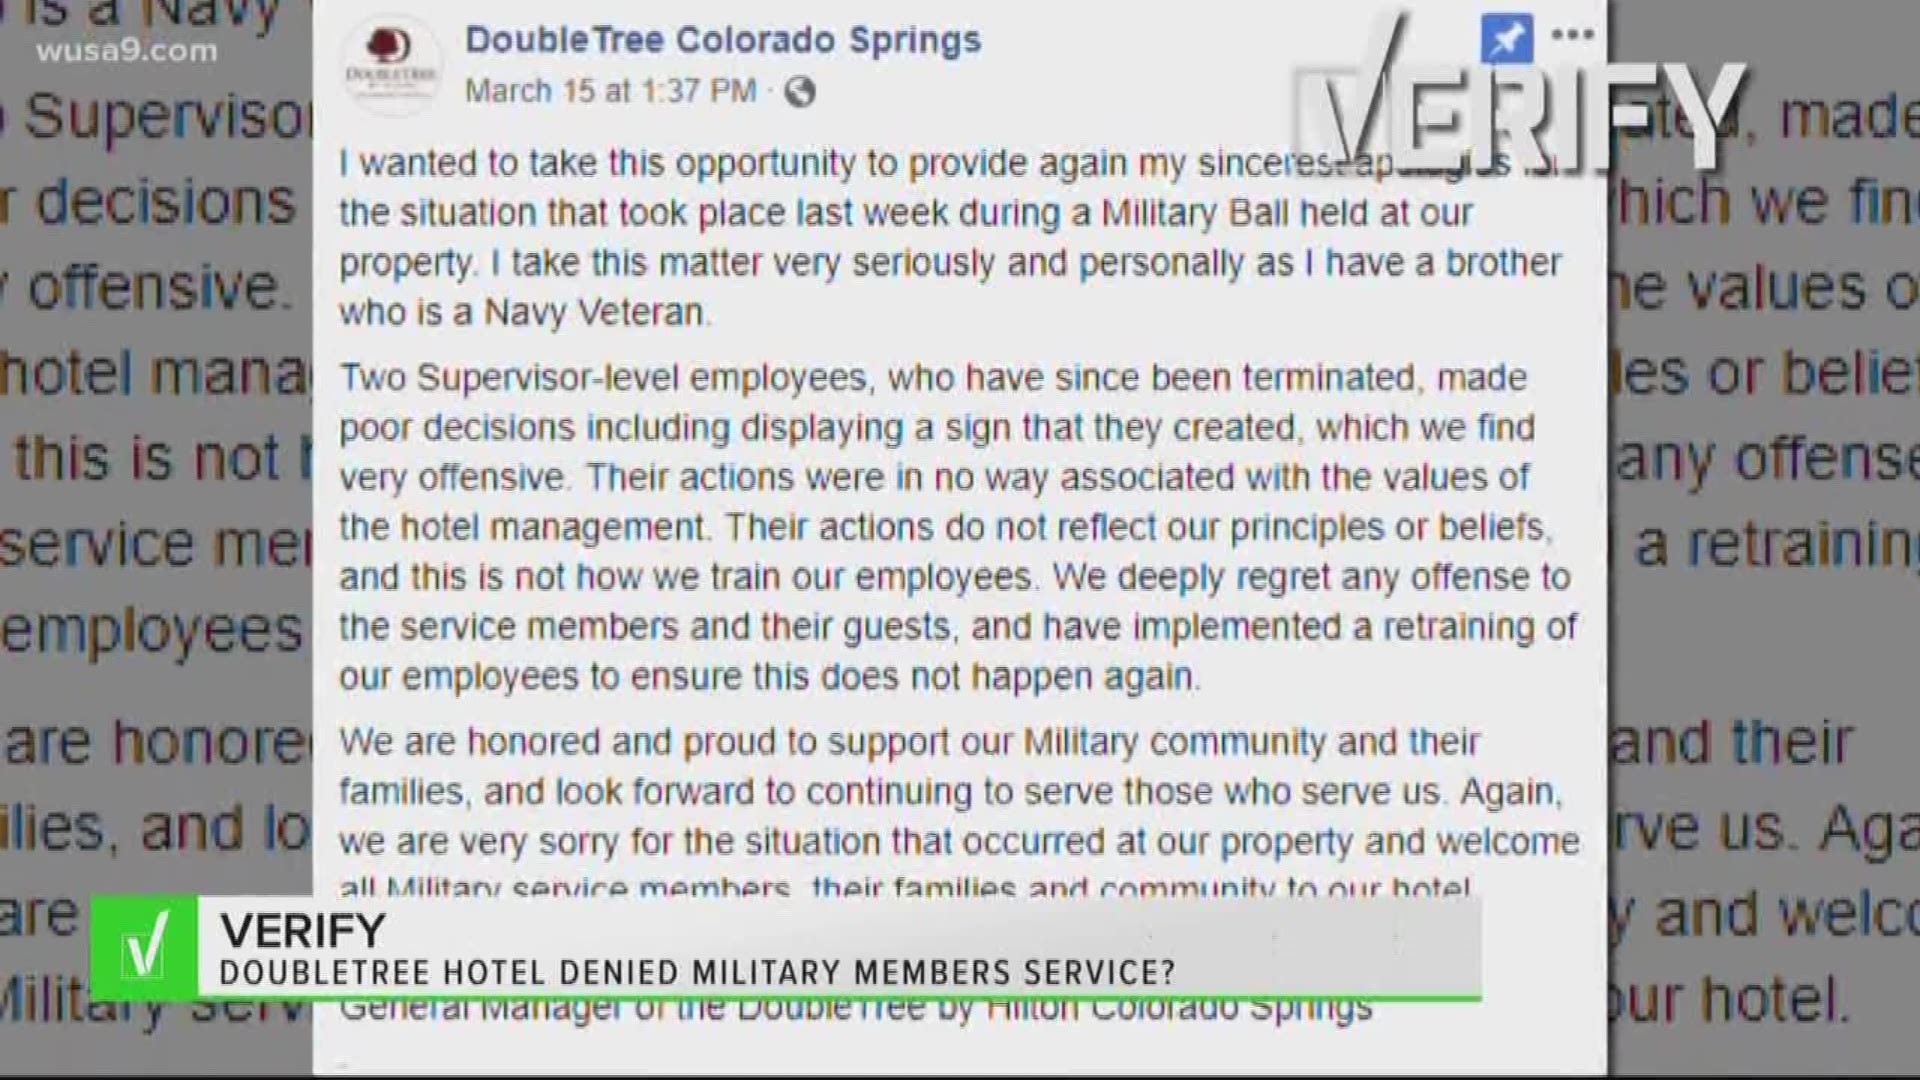 A viral image on social media shows a sign that claims DoubleTree Hotels denied service to military personnel and their guests.